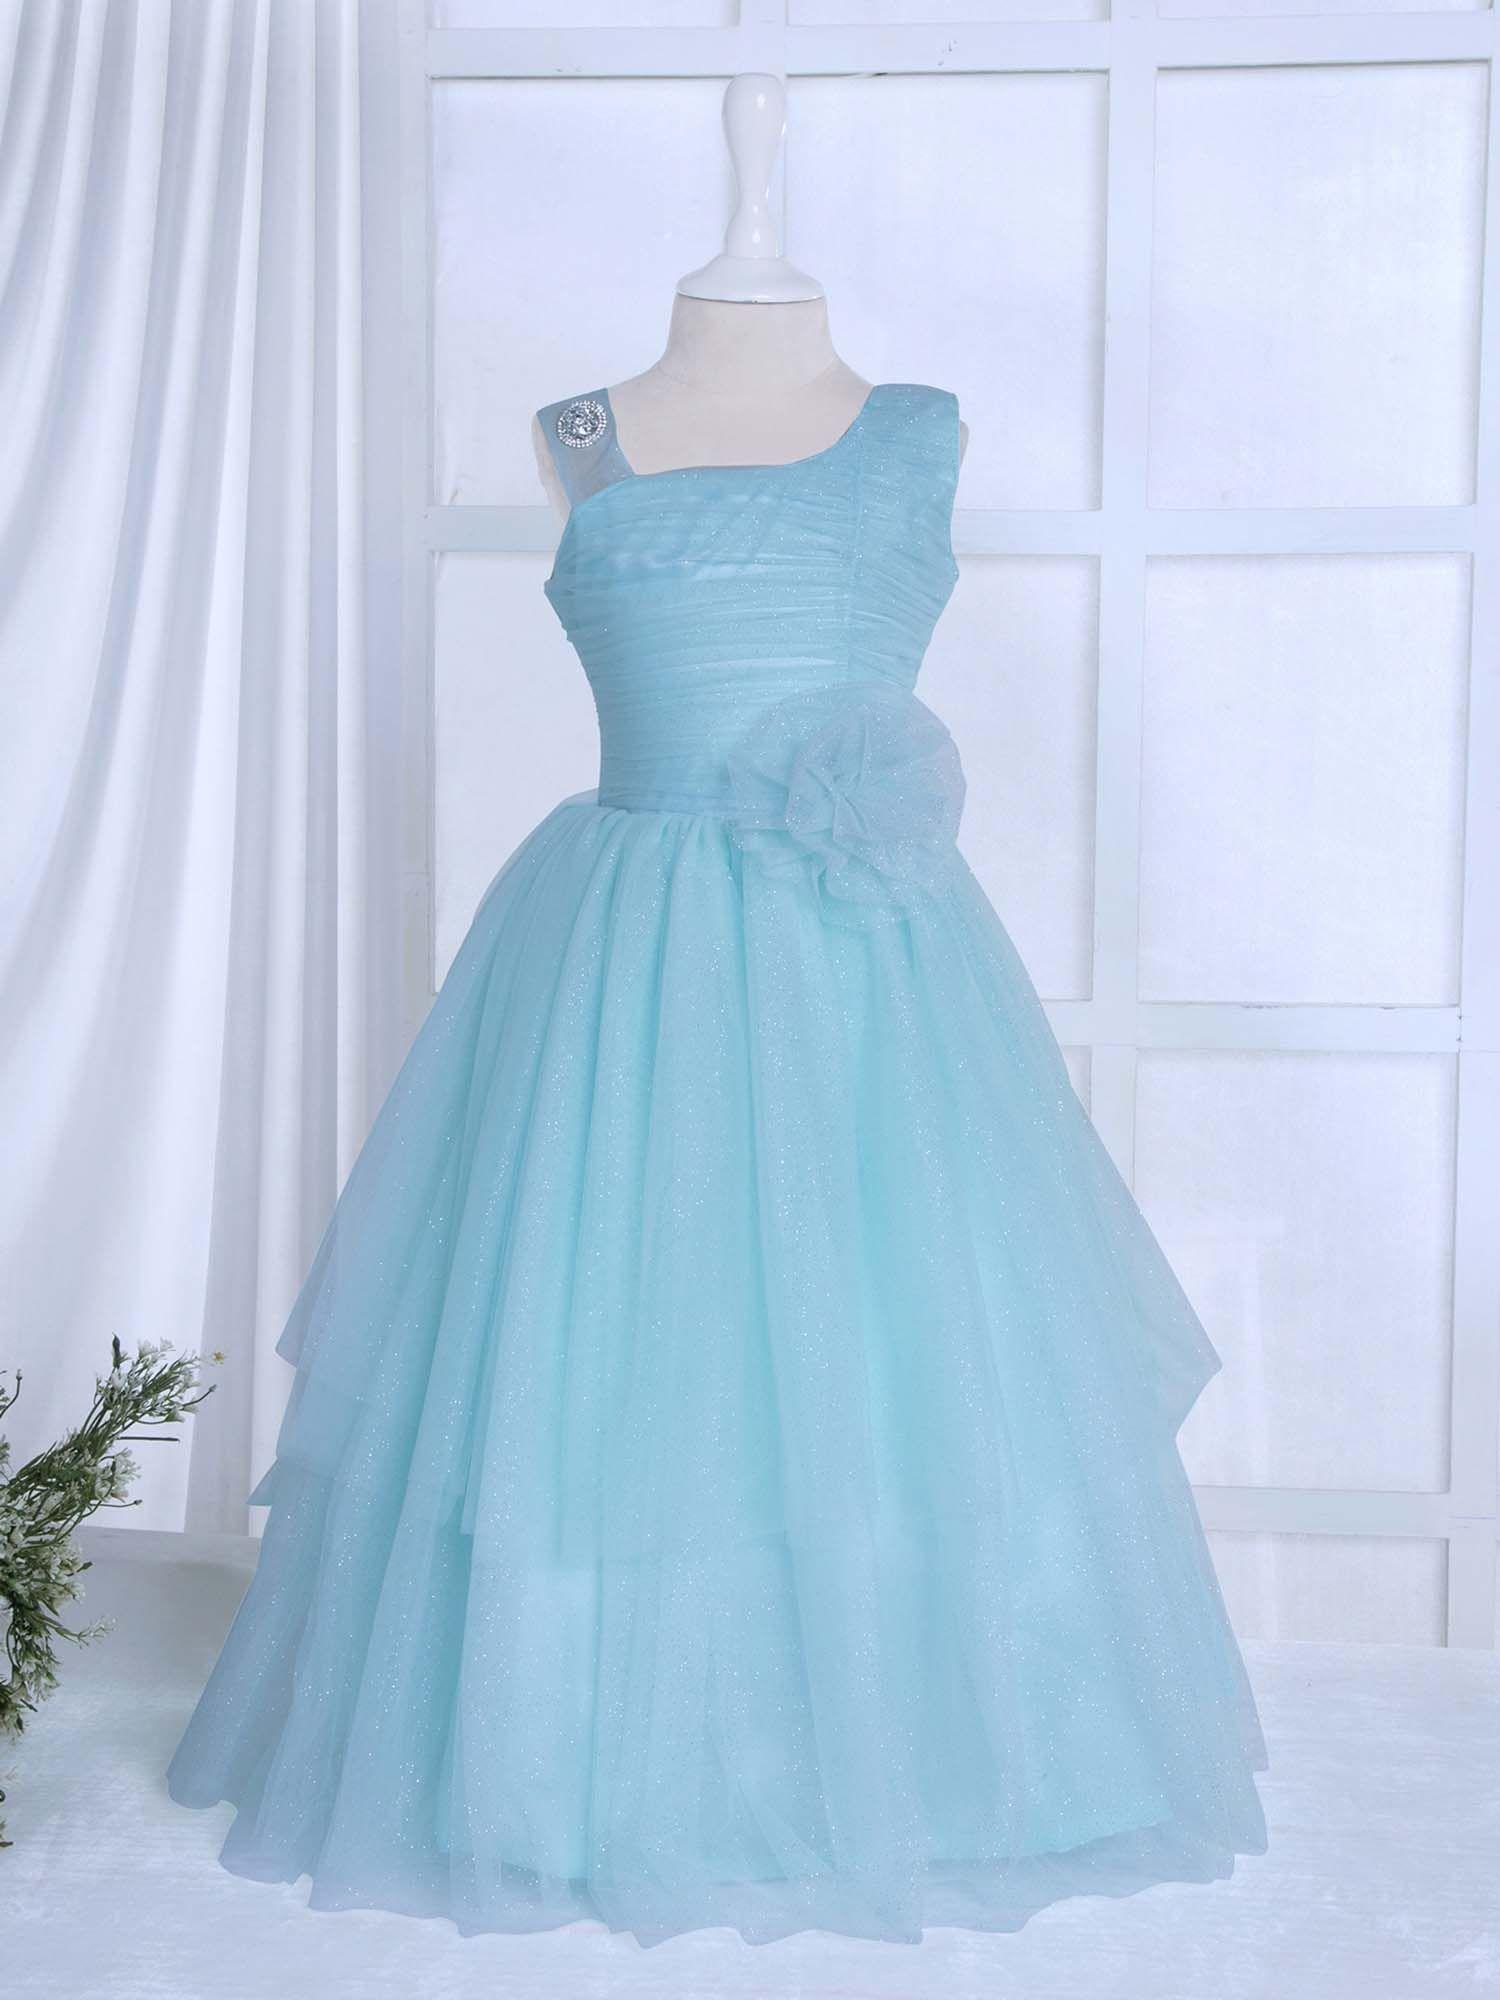 sparkling seagreen floor length ball-gown for baby girls (set of 2)